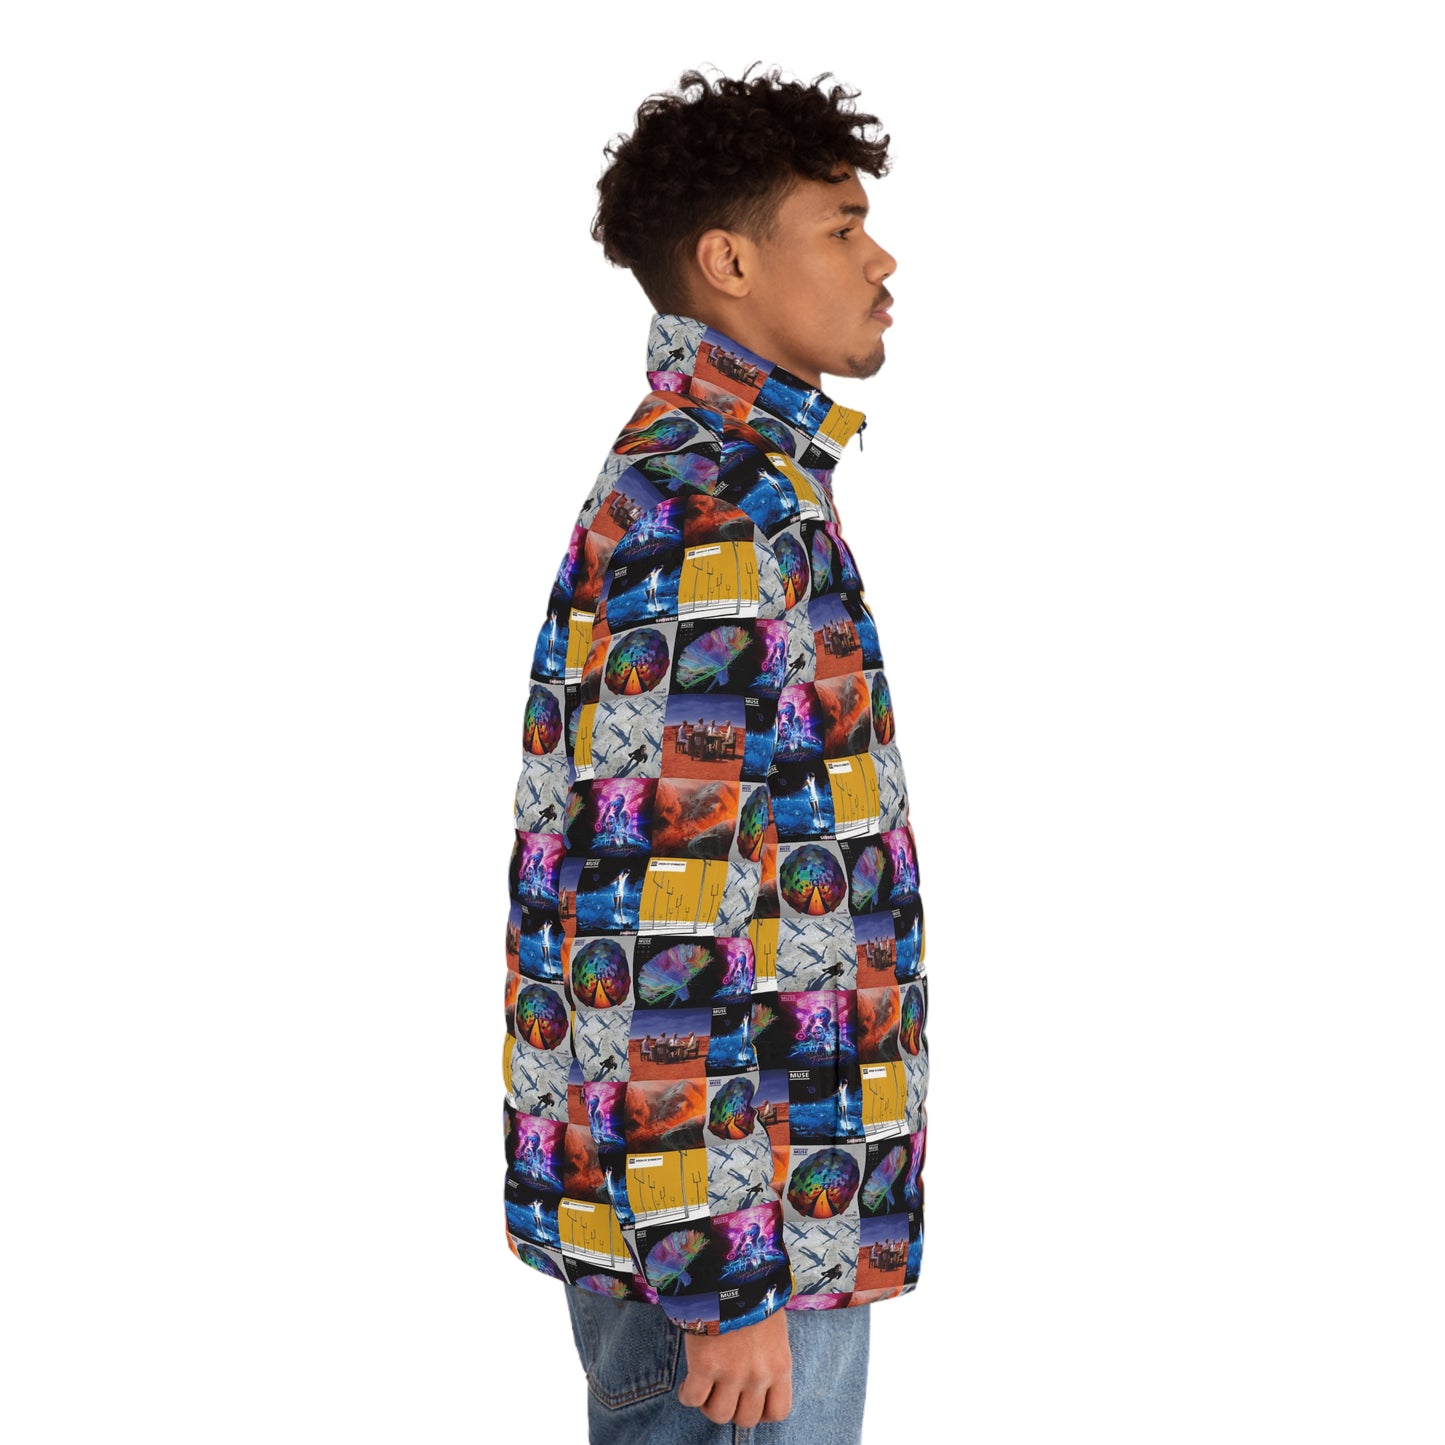 Muse Album Cover Collage Men's Puffer Jacket